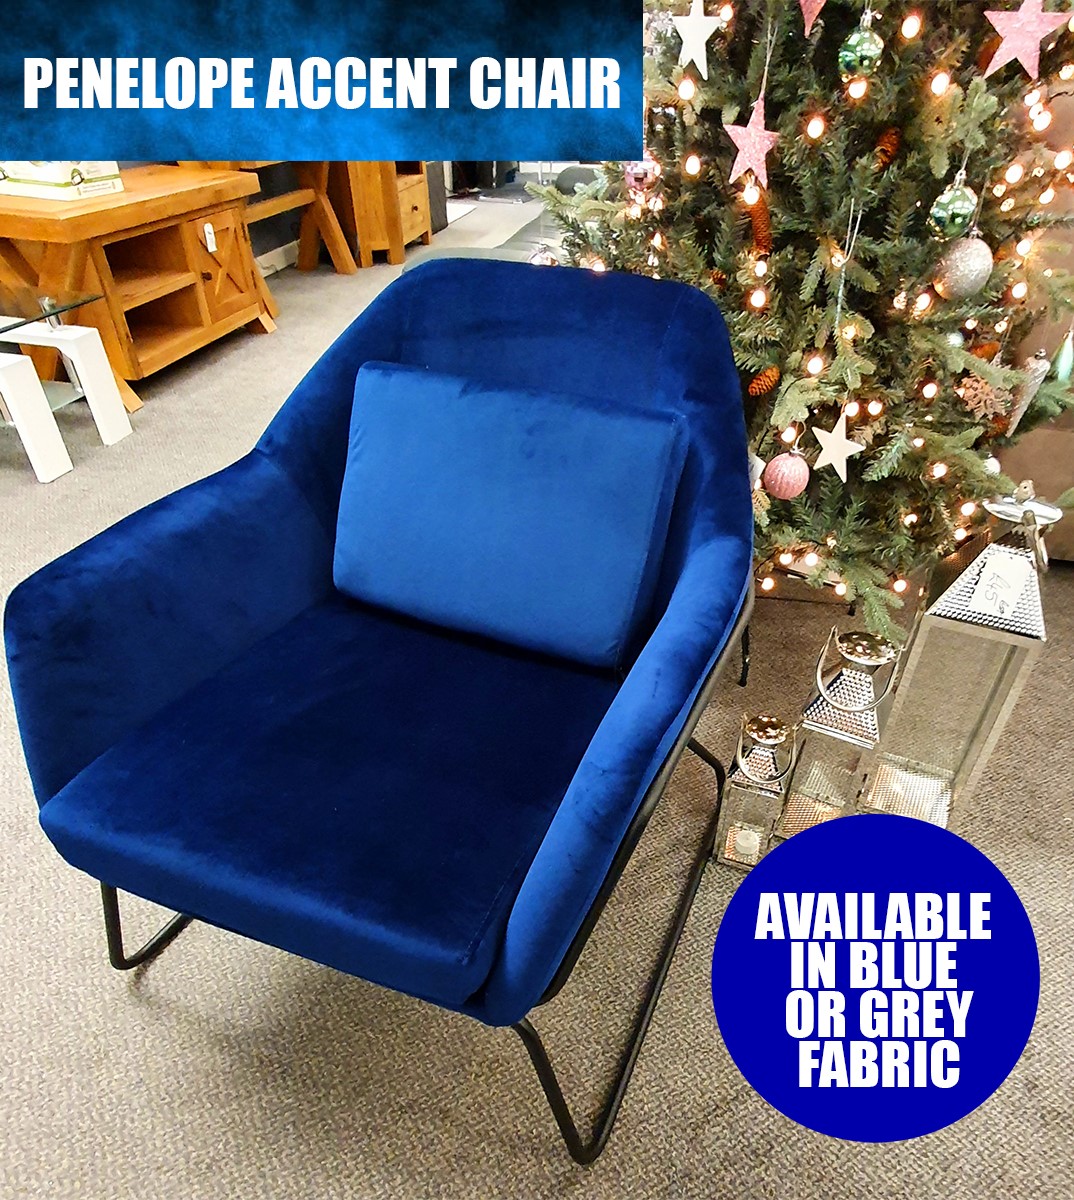 Penelope Accent Chair 1